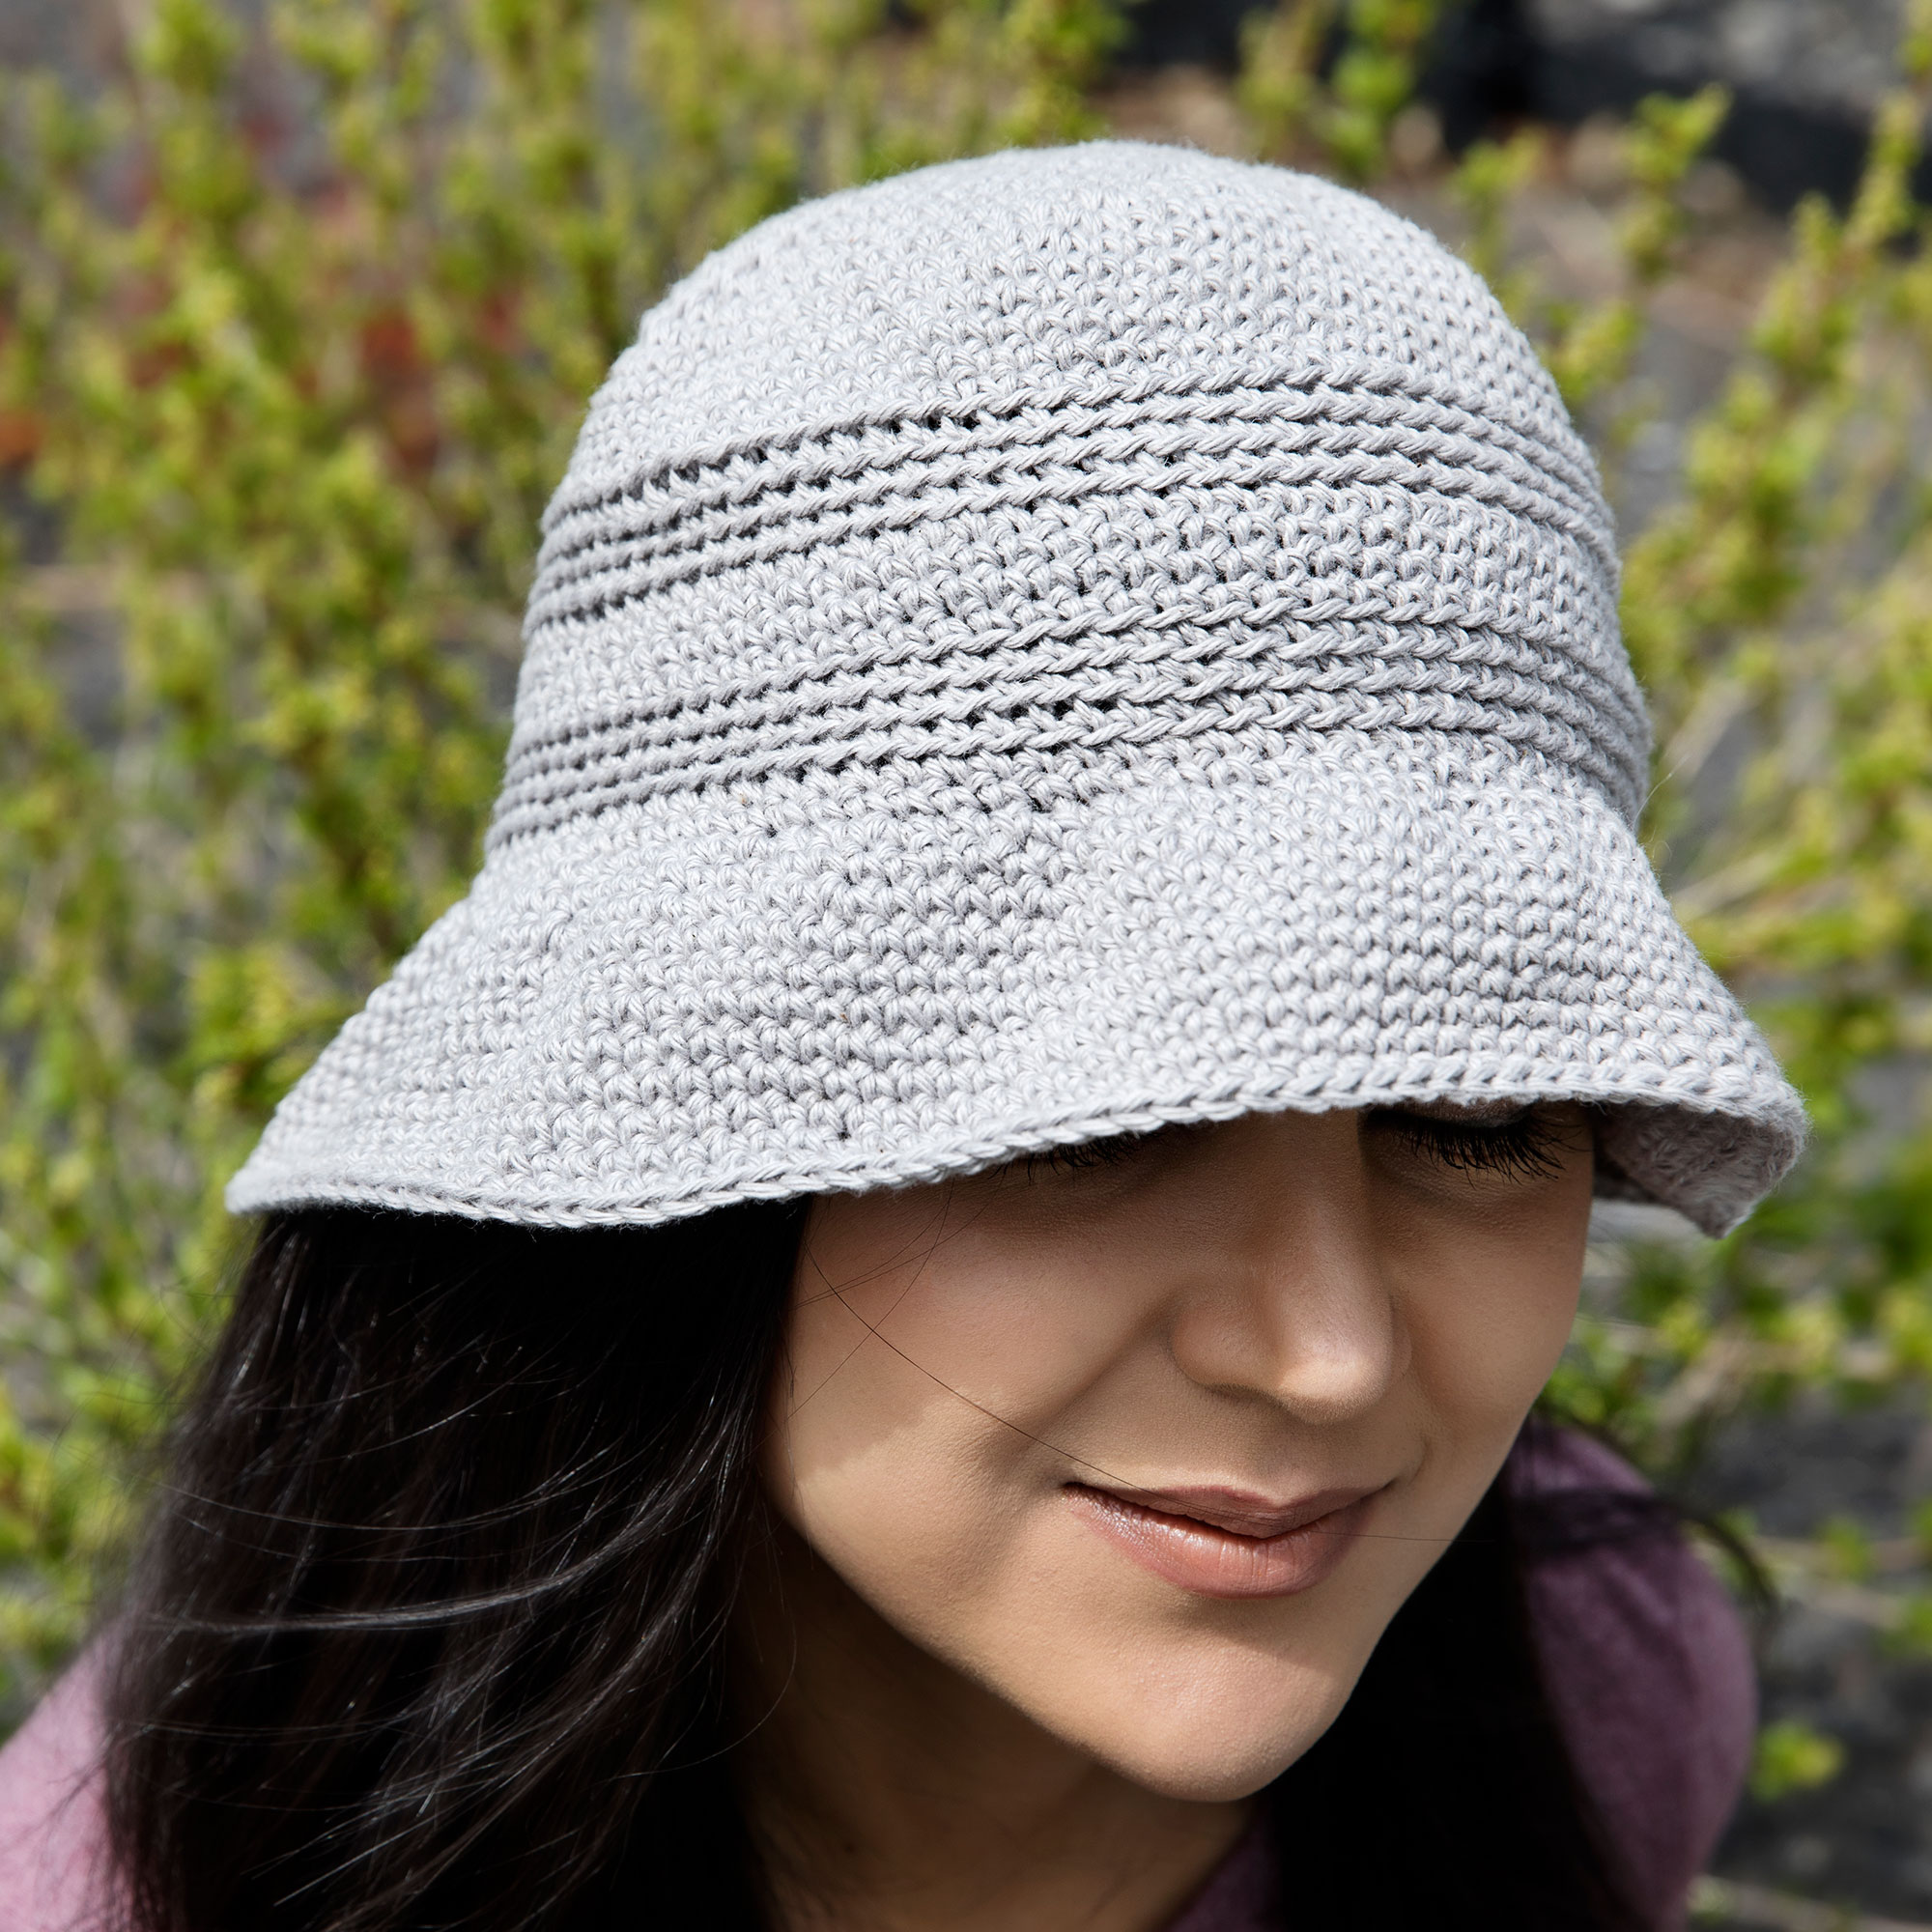 Free Printable Crochet Bucket Hat Pattern - Printable Templates by Nora